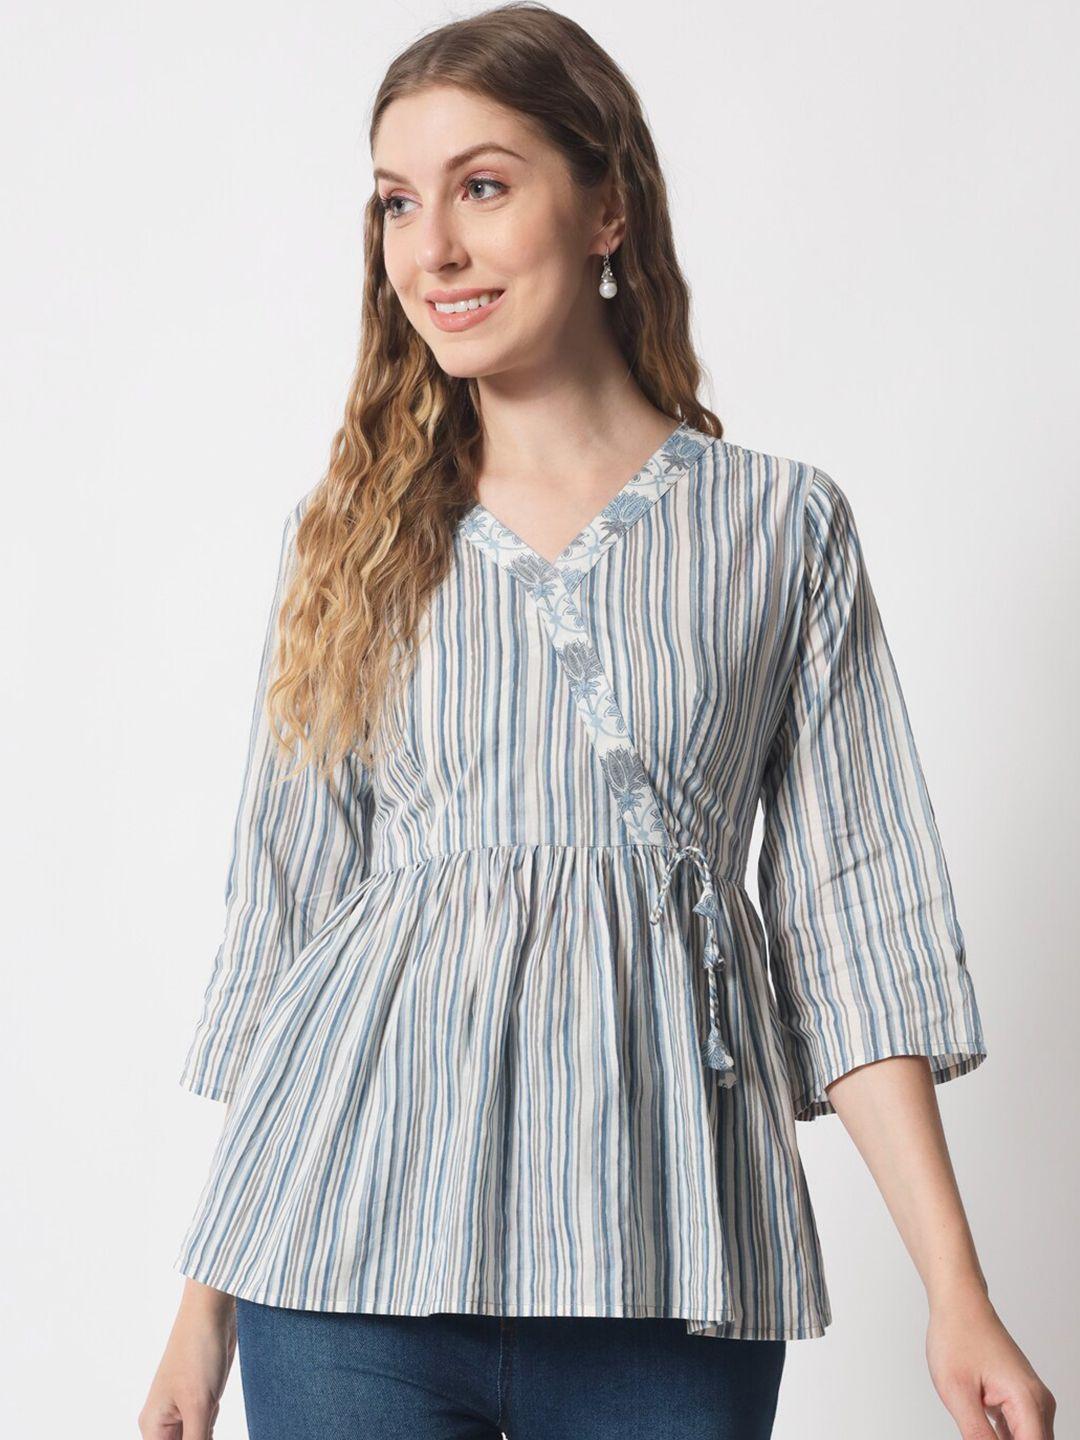 mishpra-striped-gathered-or-pleated-pure-cotton-wrap-top